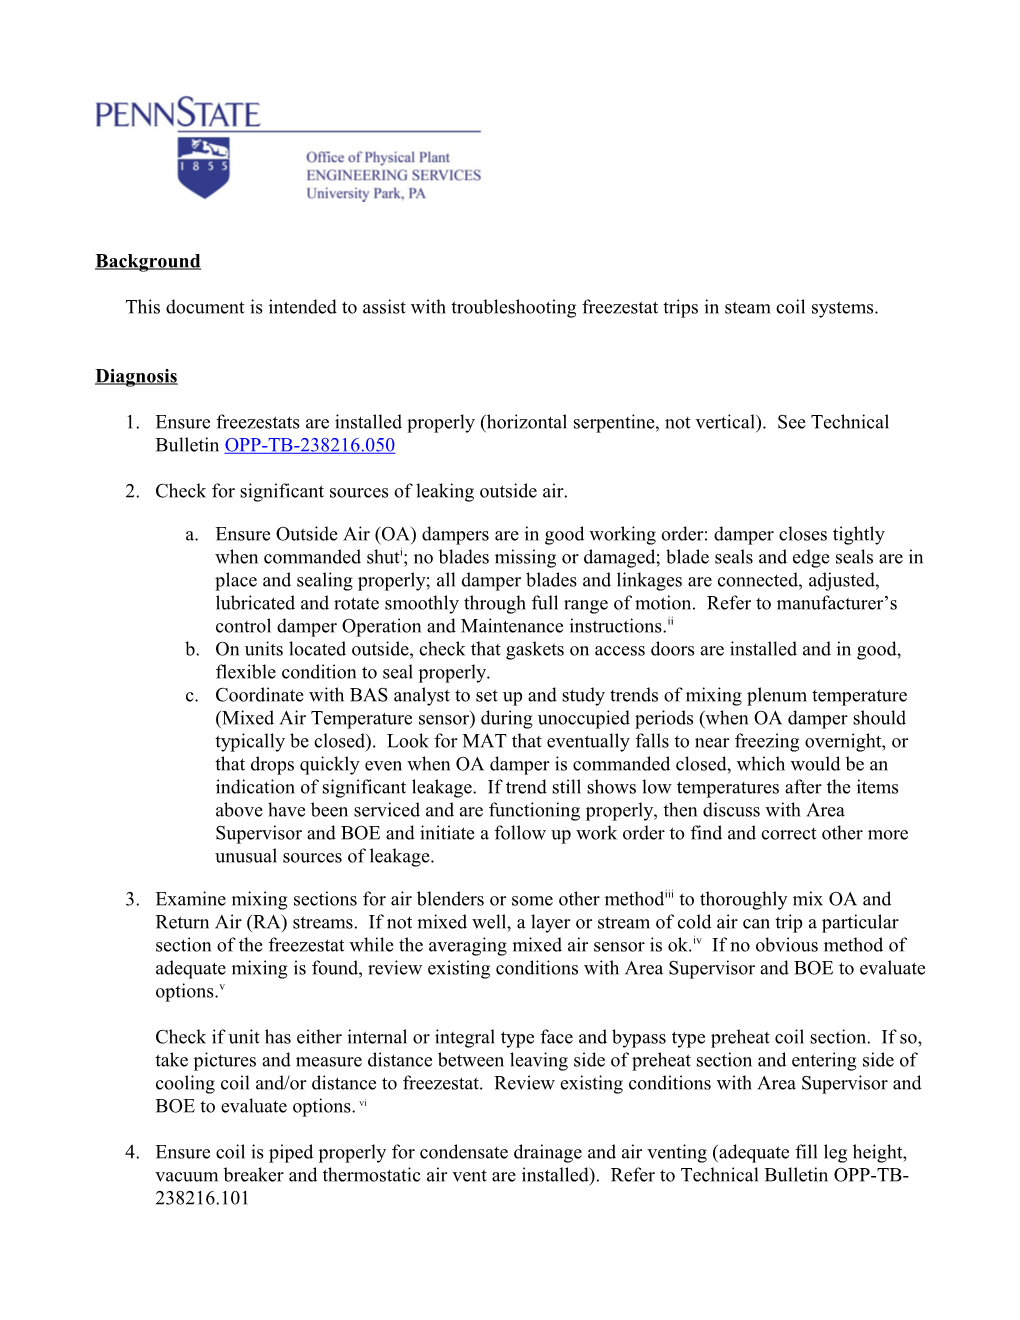 This Document Is Intended to Assist with Troubleshooting Freezestat Trips in Steam Coil Systems